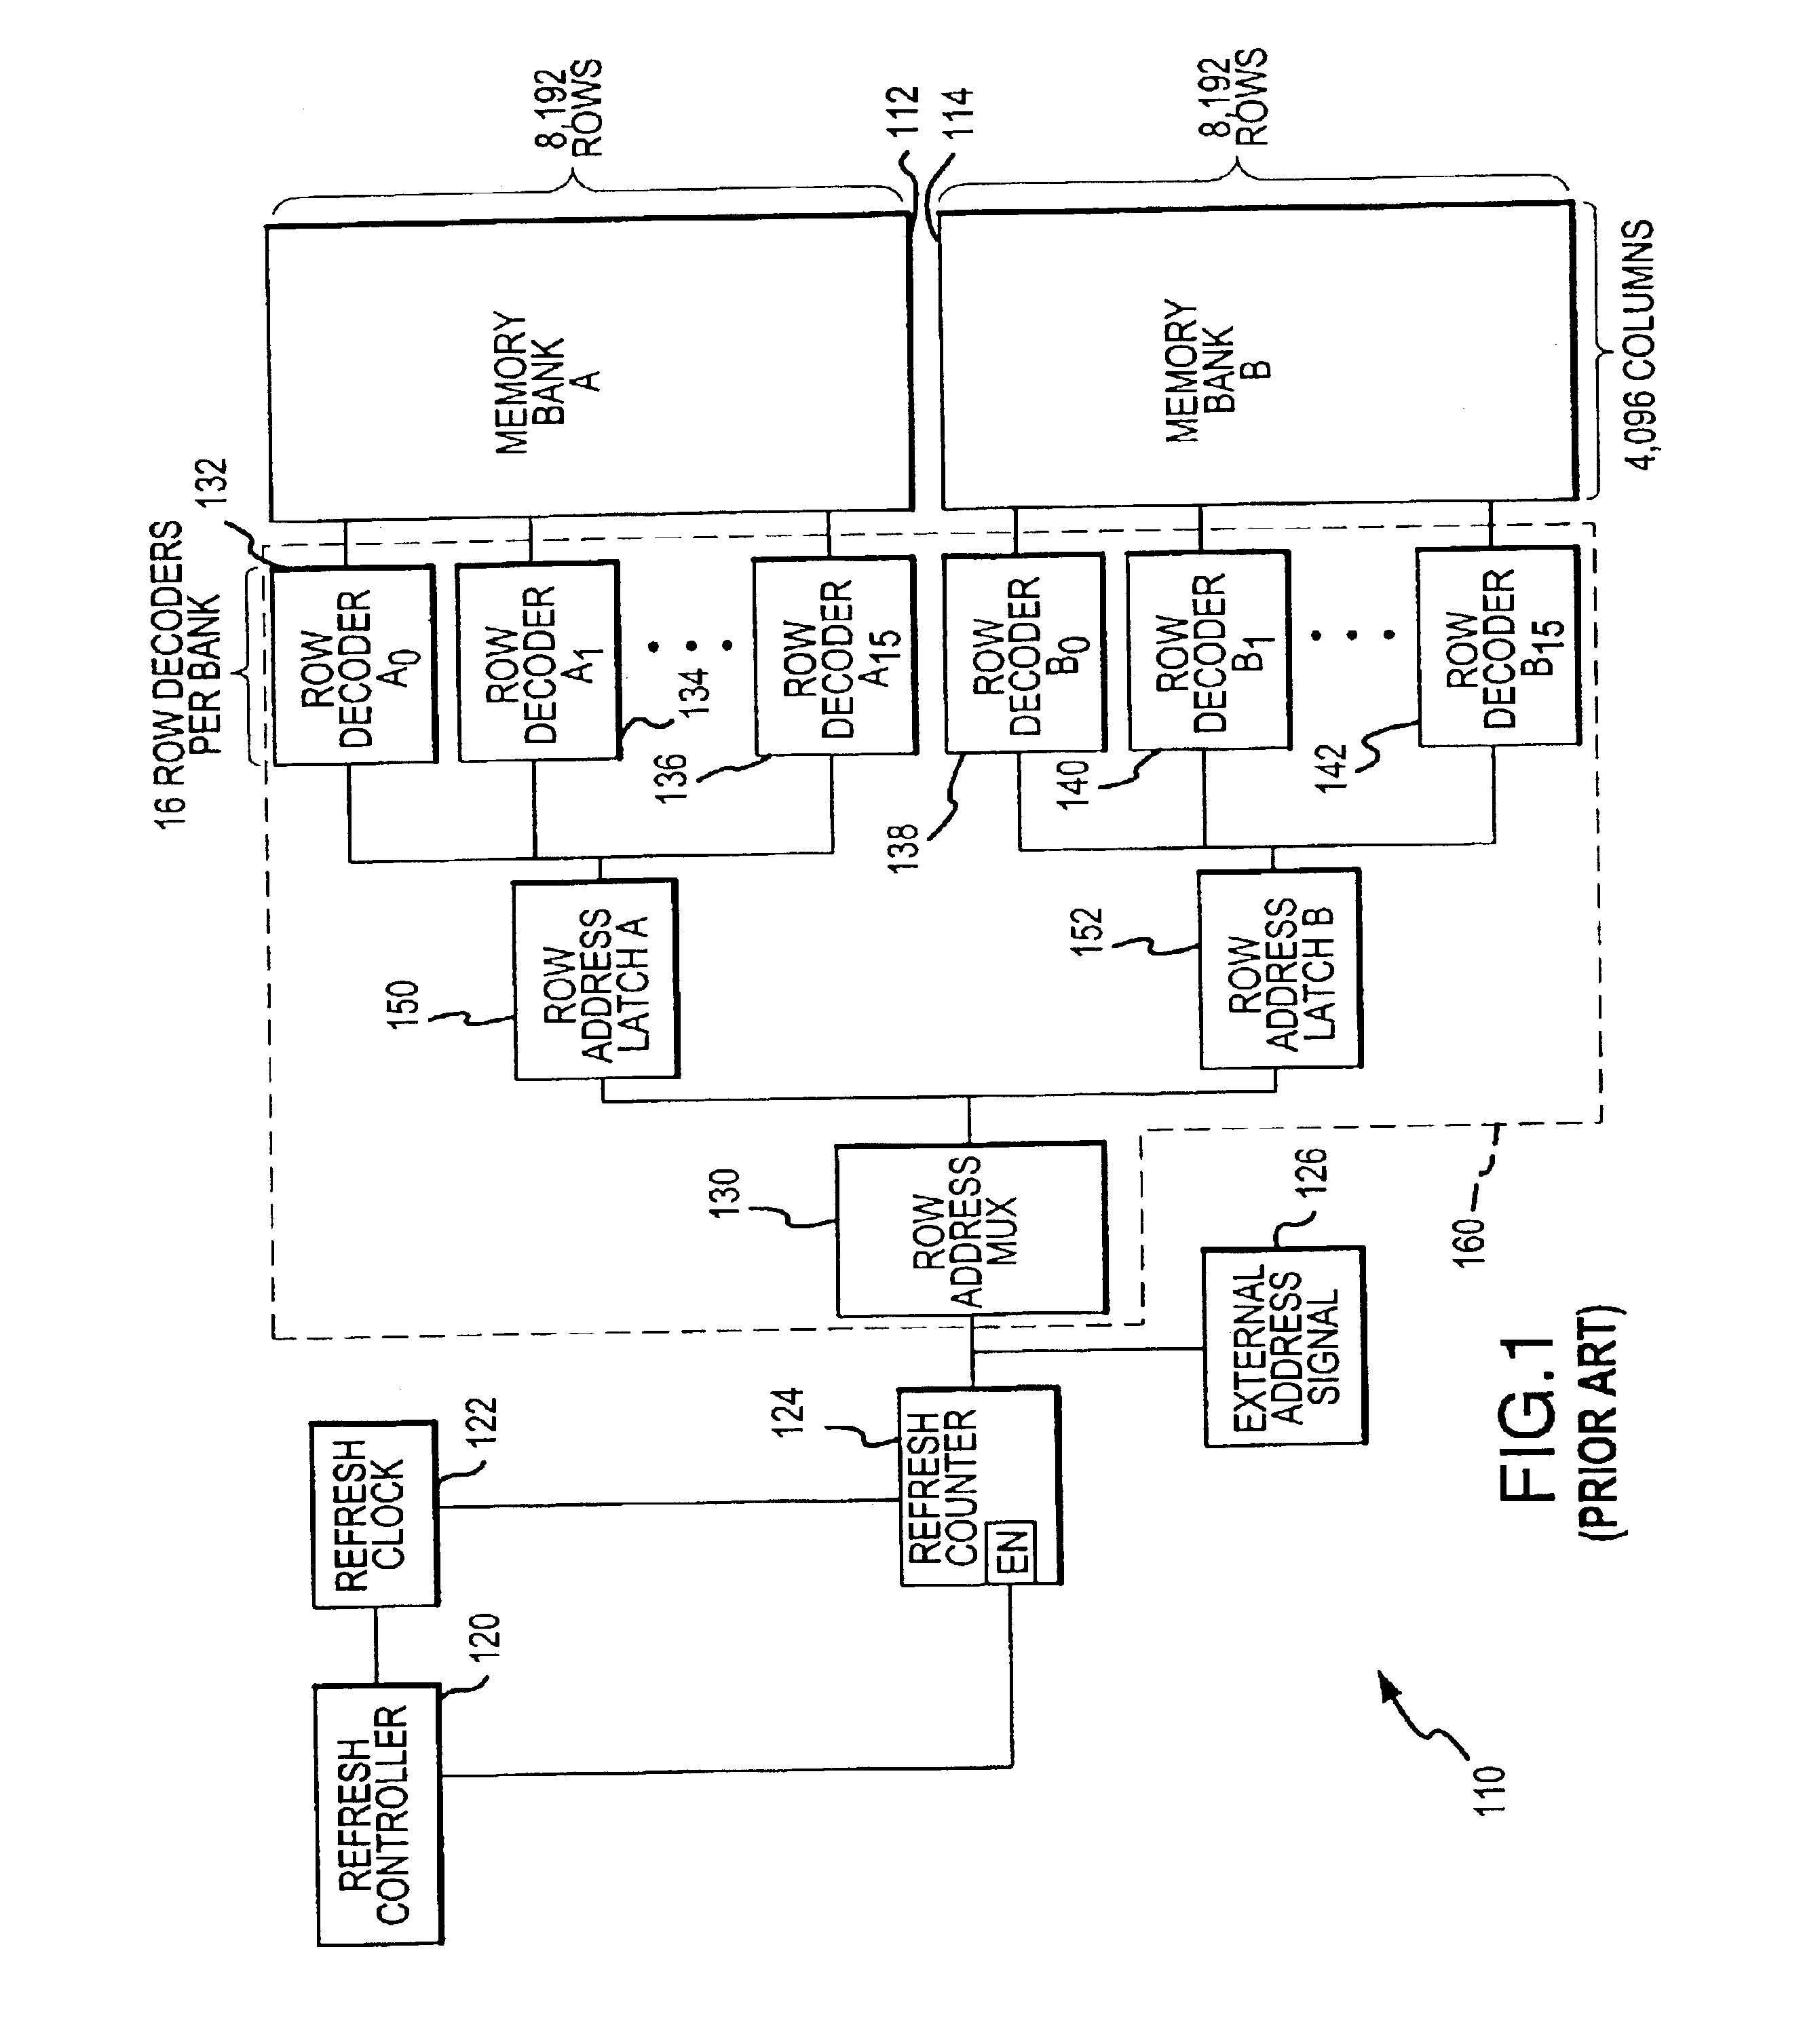 System and method for power saving memory refresh for dynamic random access memory devices after an extended interval